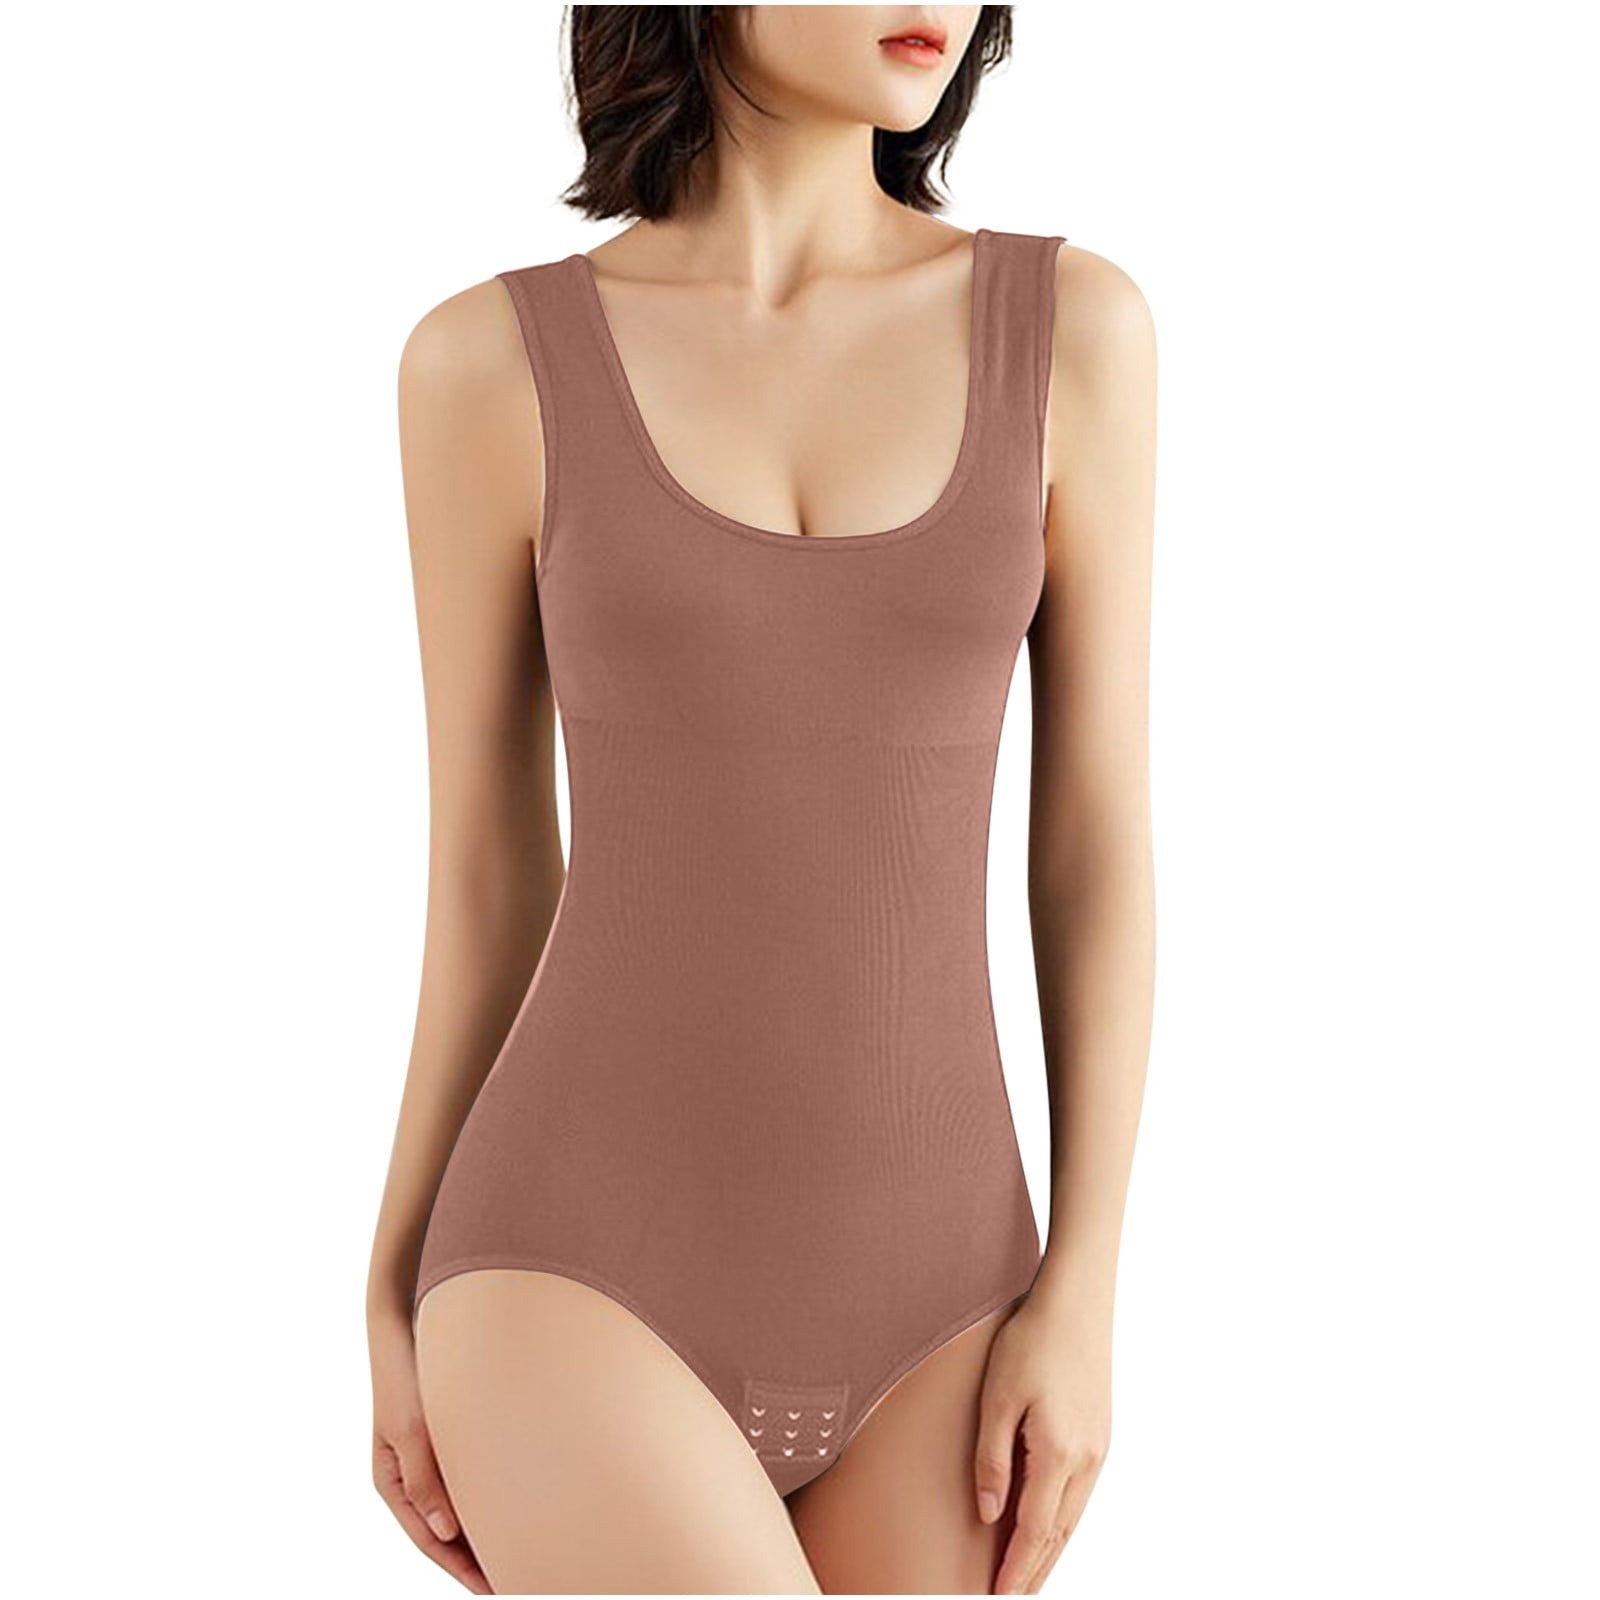 Aueoeo Shapewear for Women, Body Suits Women Clothing Long Sleeve